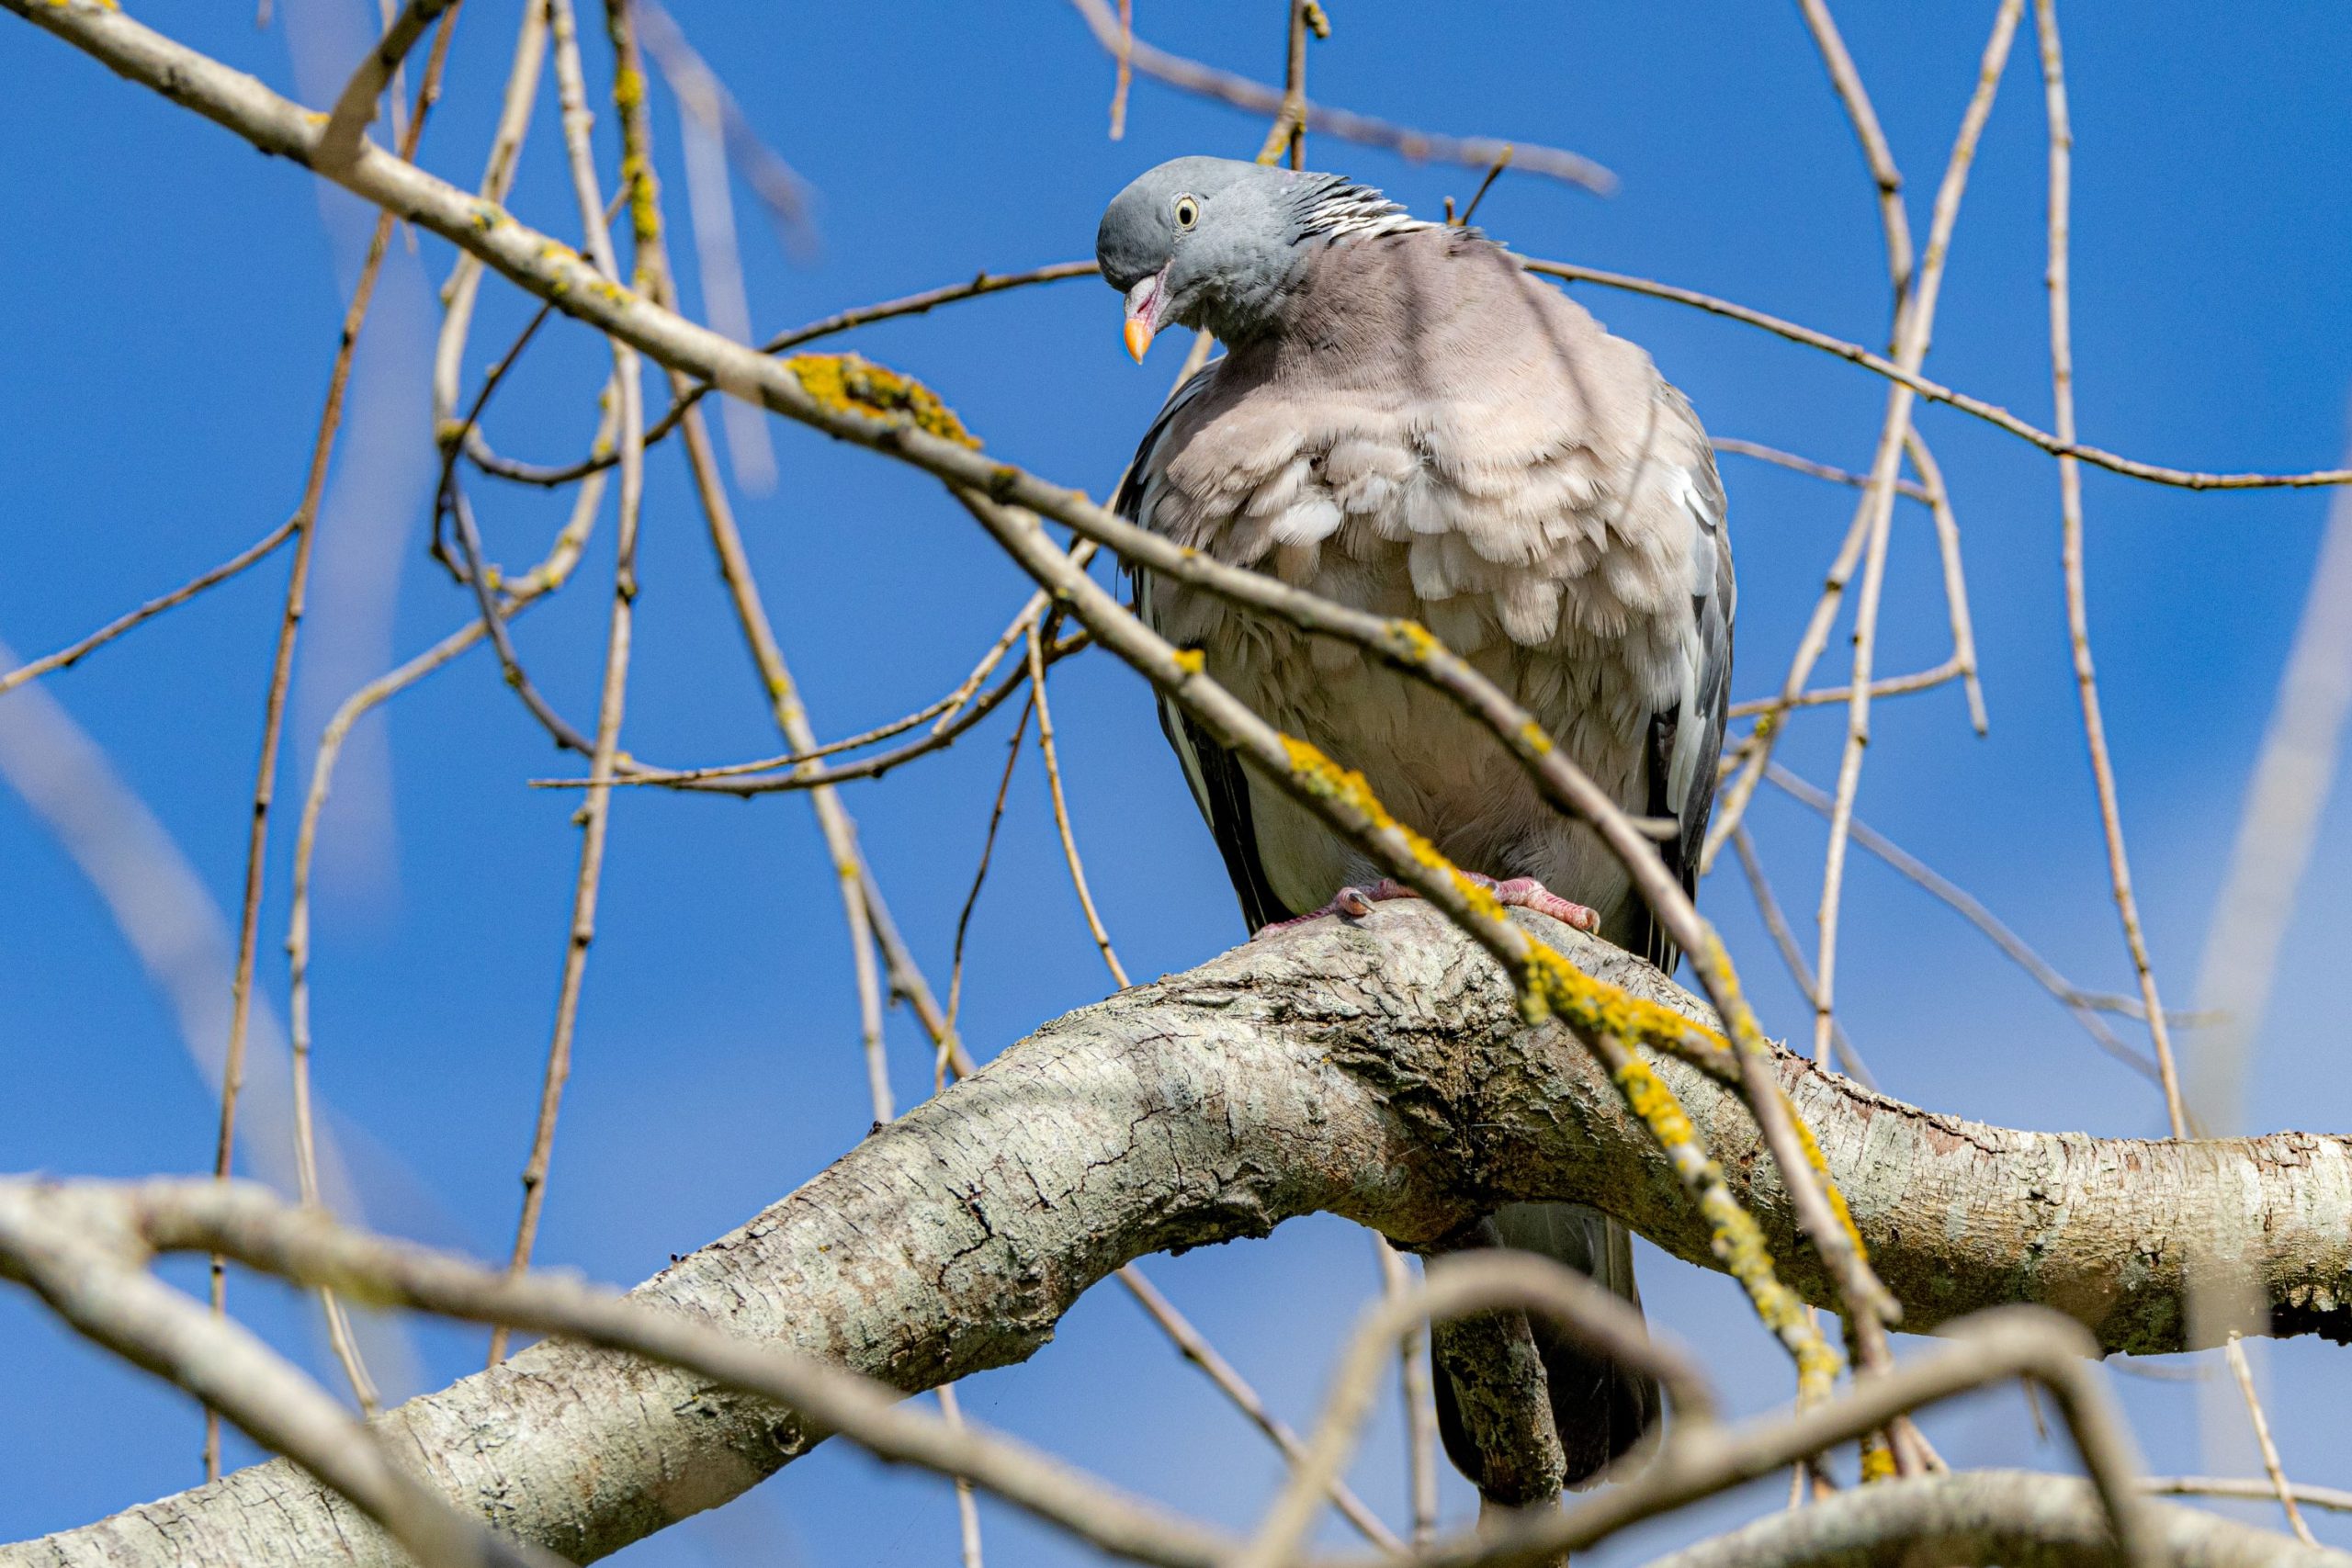 A Wood Pigeon perched in a tree